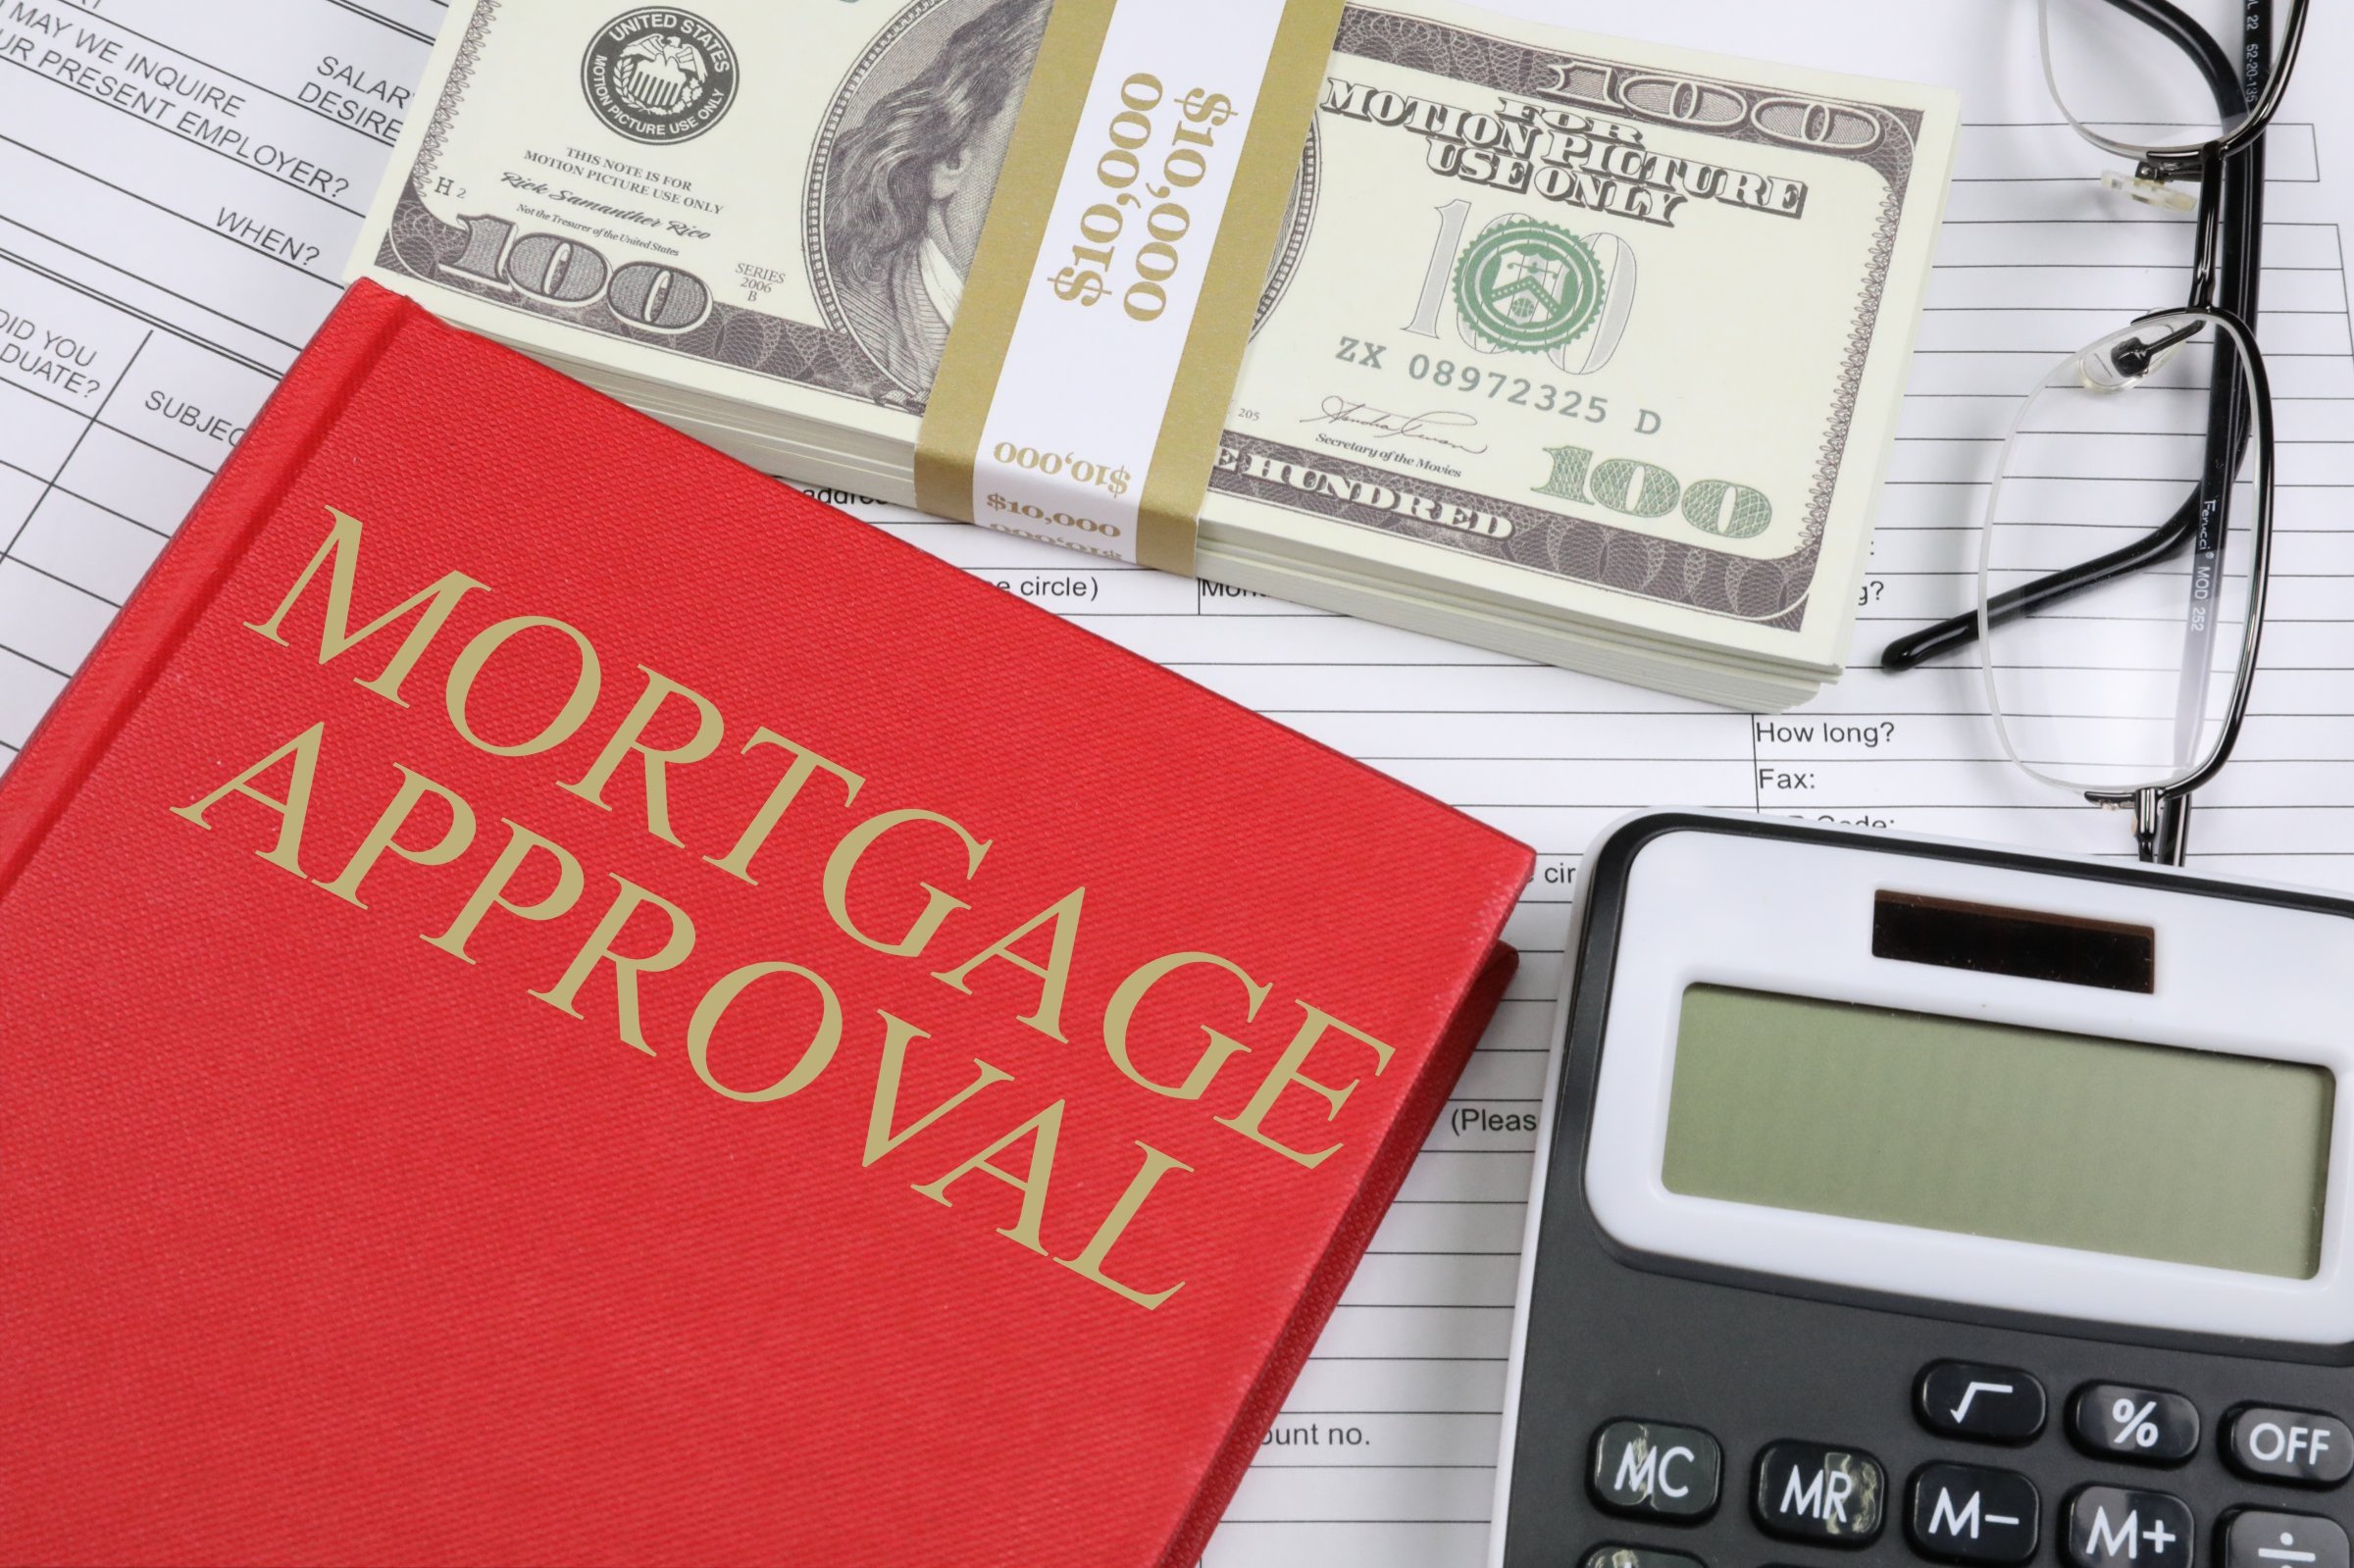 mortgage approval